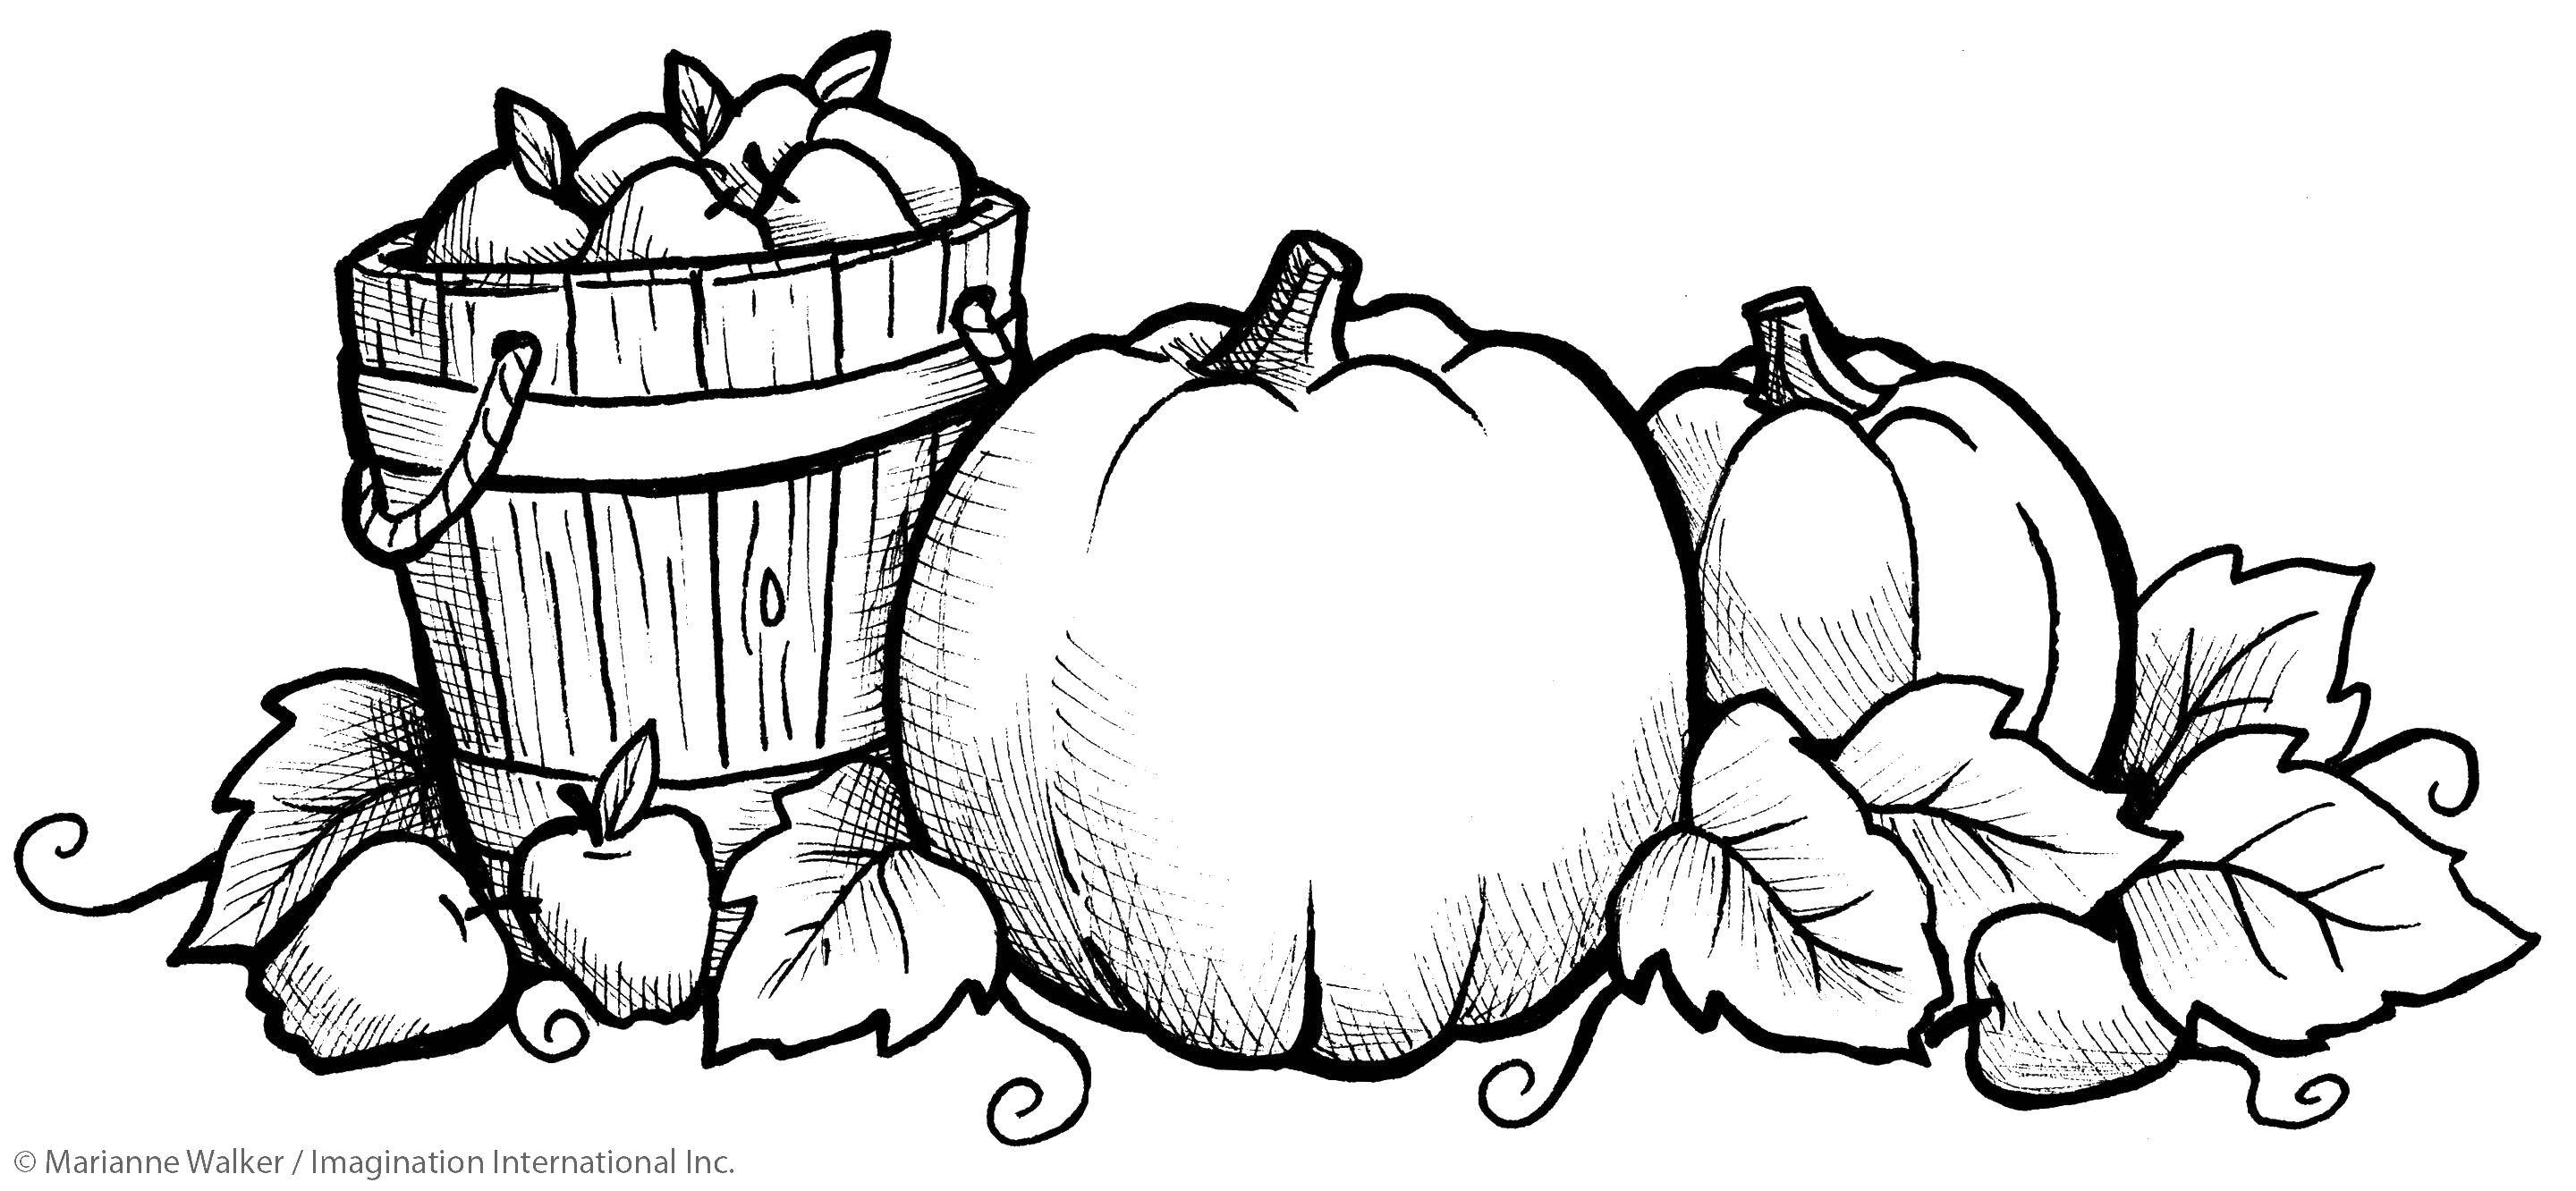 Coloring Pumpkins and a barrel of apples. Category Autumn. Tags:  pumpkin, apples, bucket, leaves.